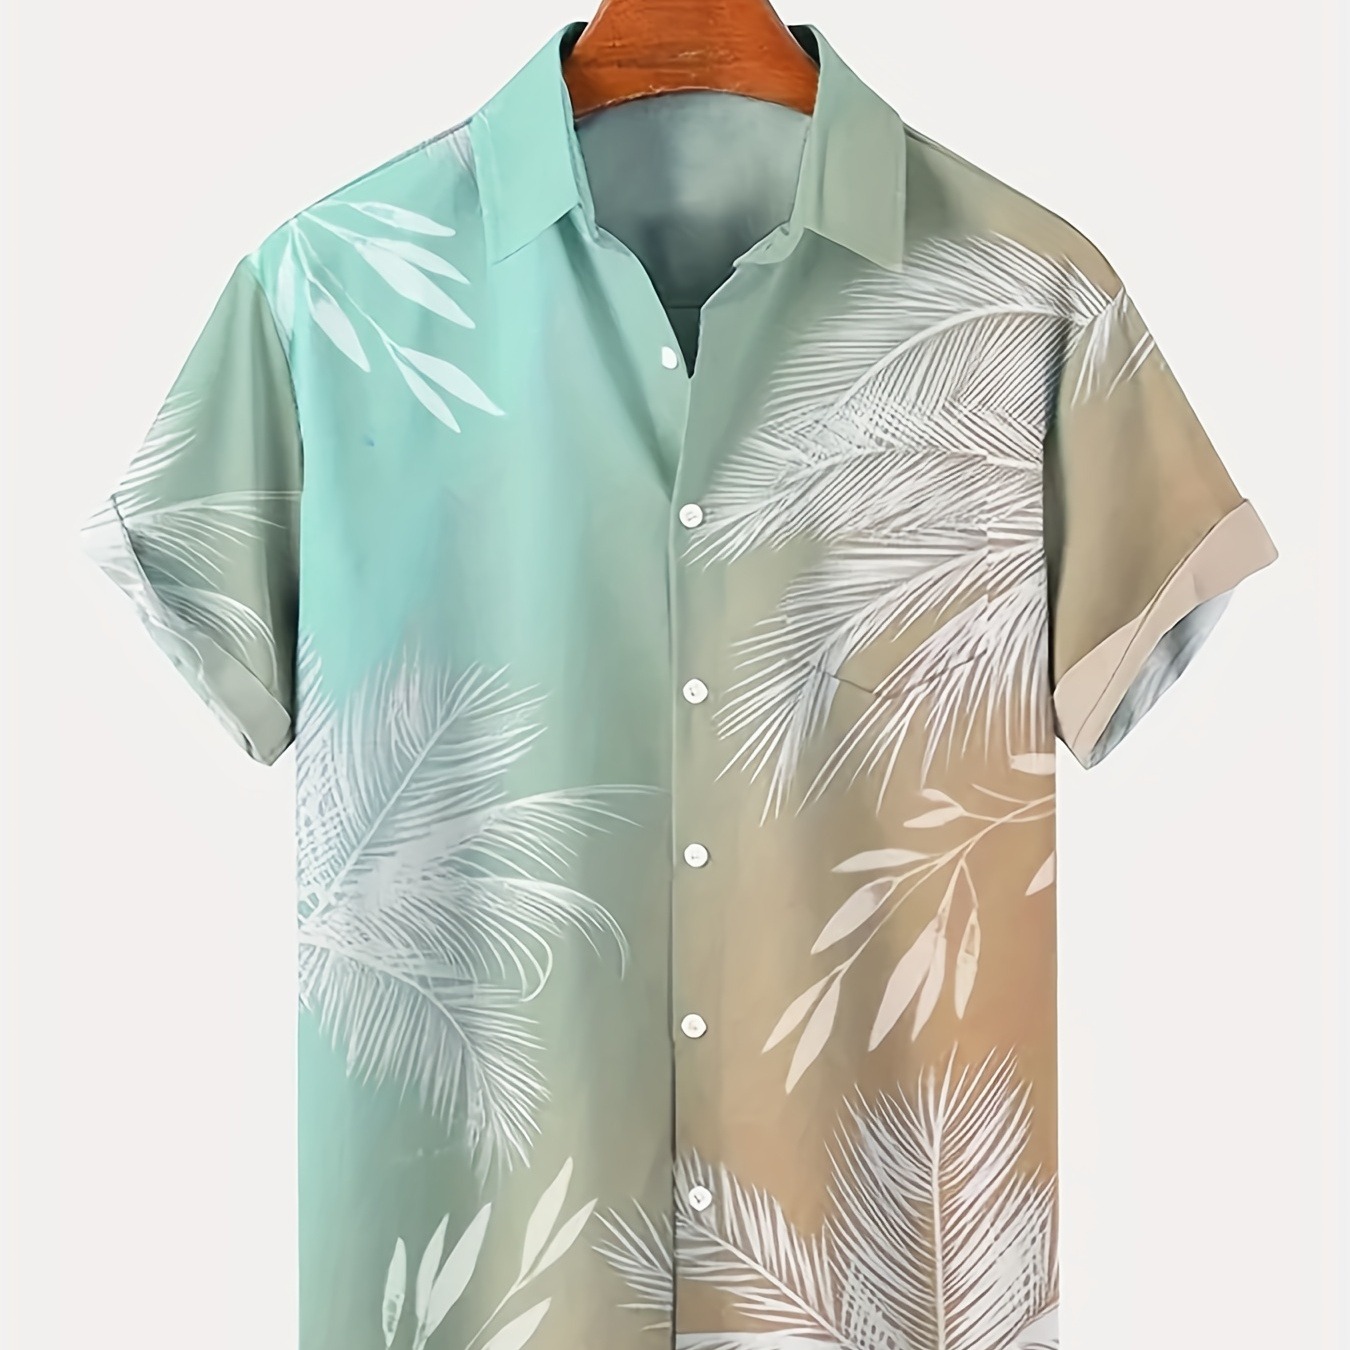 

Men's Gradient Palm Leaf Printed Hawaiian Button Up Lapel Shirt, Resort Casual Comfy Tee Top, Plus Size Fashion Summer Clothing